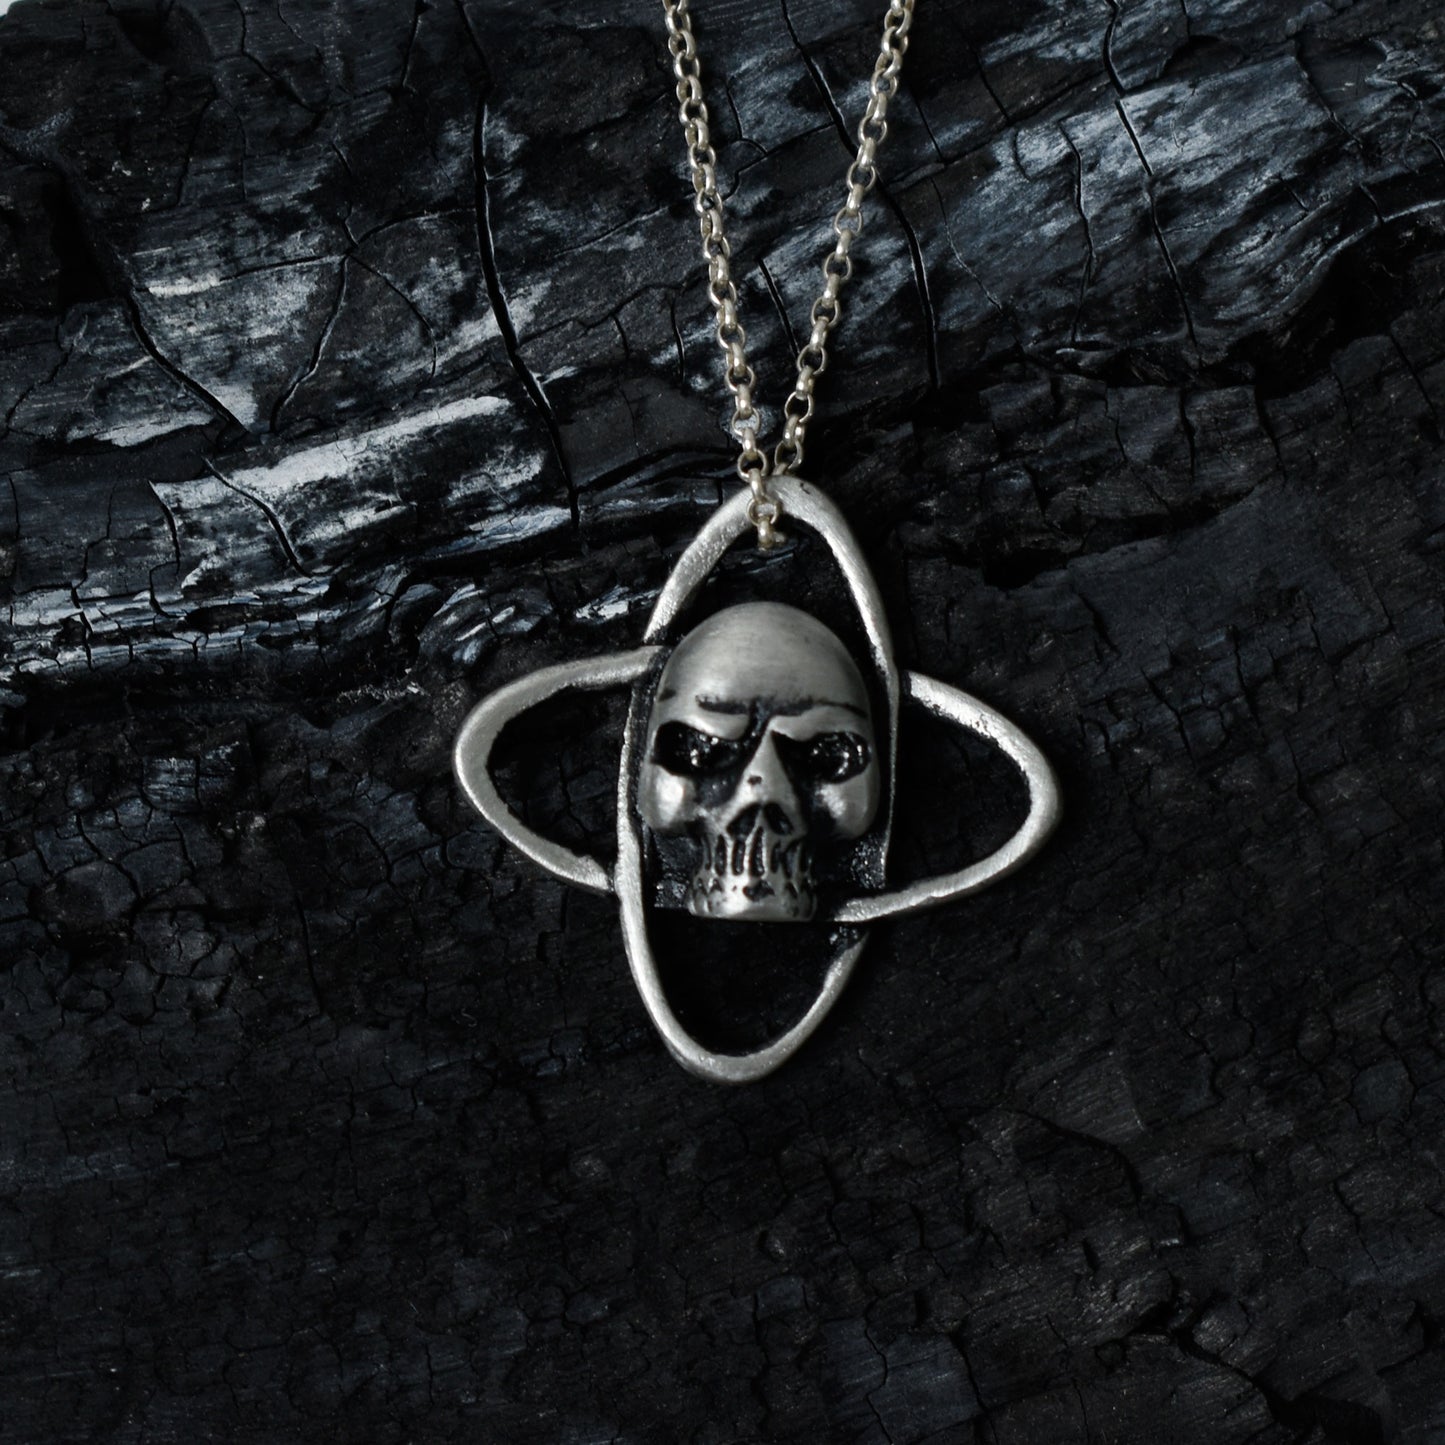 New Gothic Skull Silver Pewter Charm Necklace Pendant Jewelry